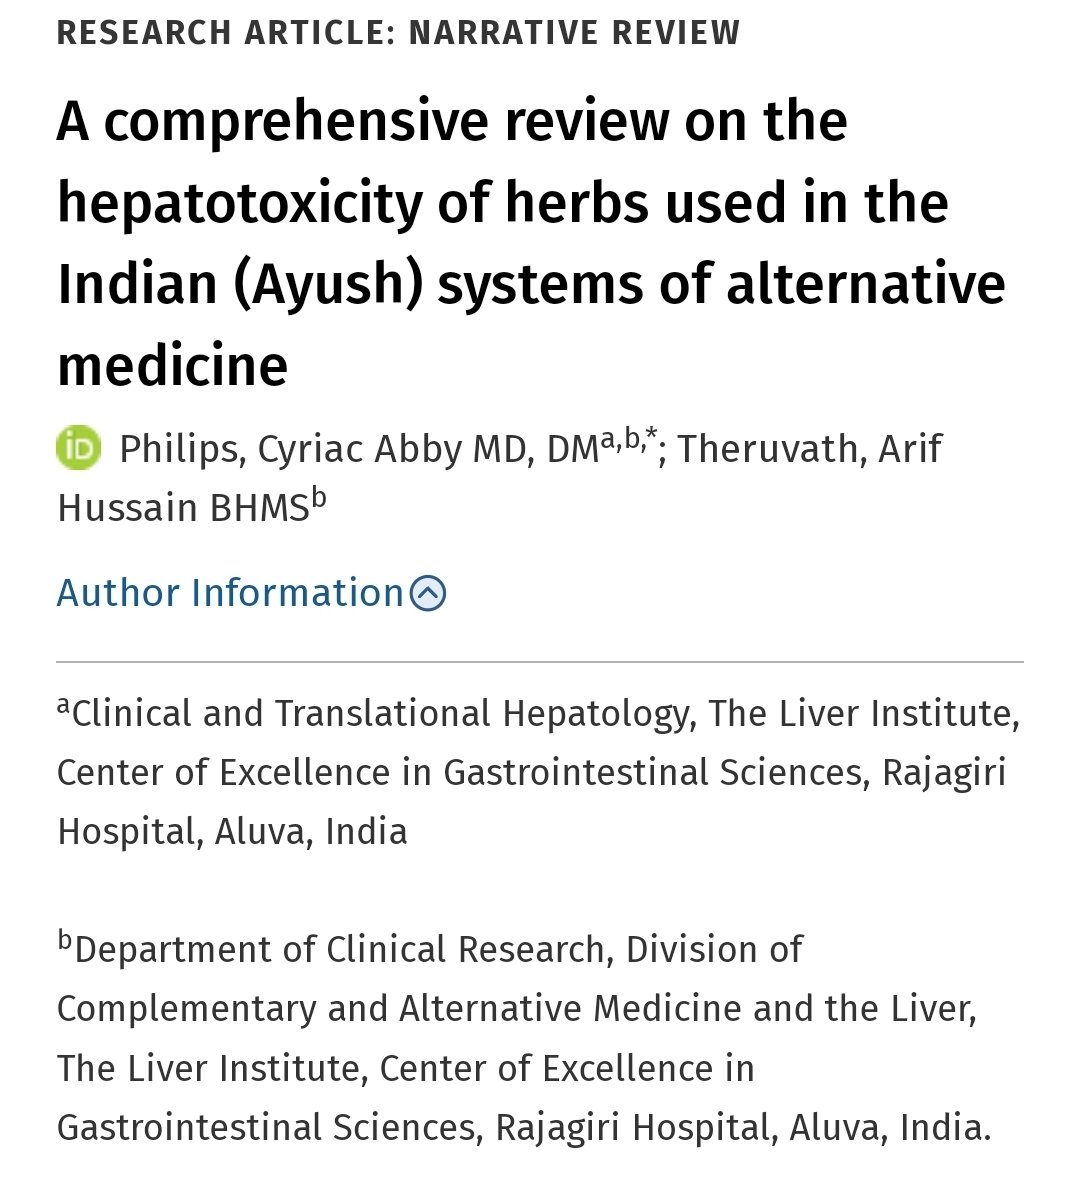 Breaking: Our exhaustive paper on liver toxicity of various herbs/ plants used in Ayurveda, Naturopathy, Unani, Siddha and Homeopathy (Ayush) systems of alternative medicine is out now (free to read) journals.lww.com/md-journal/ful… with @arifhussaintm This paper was initially an invited